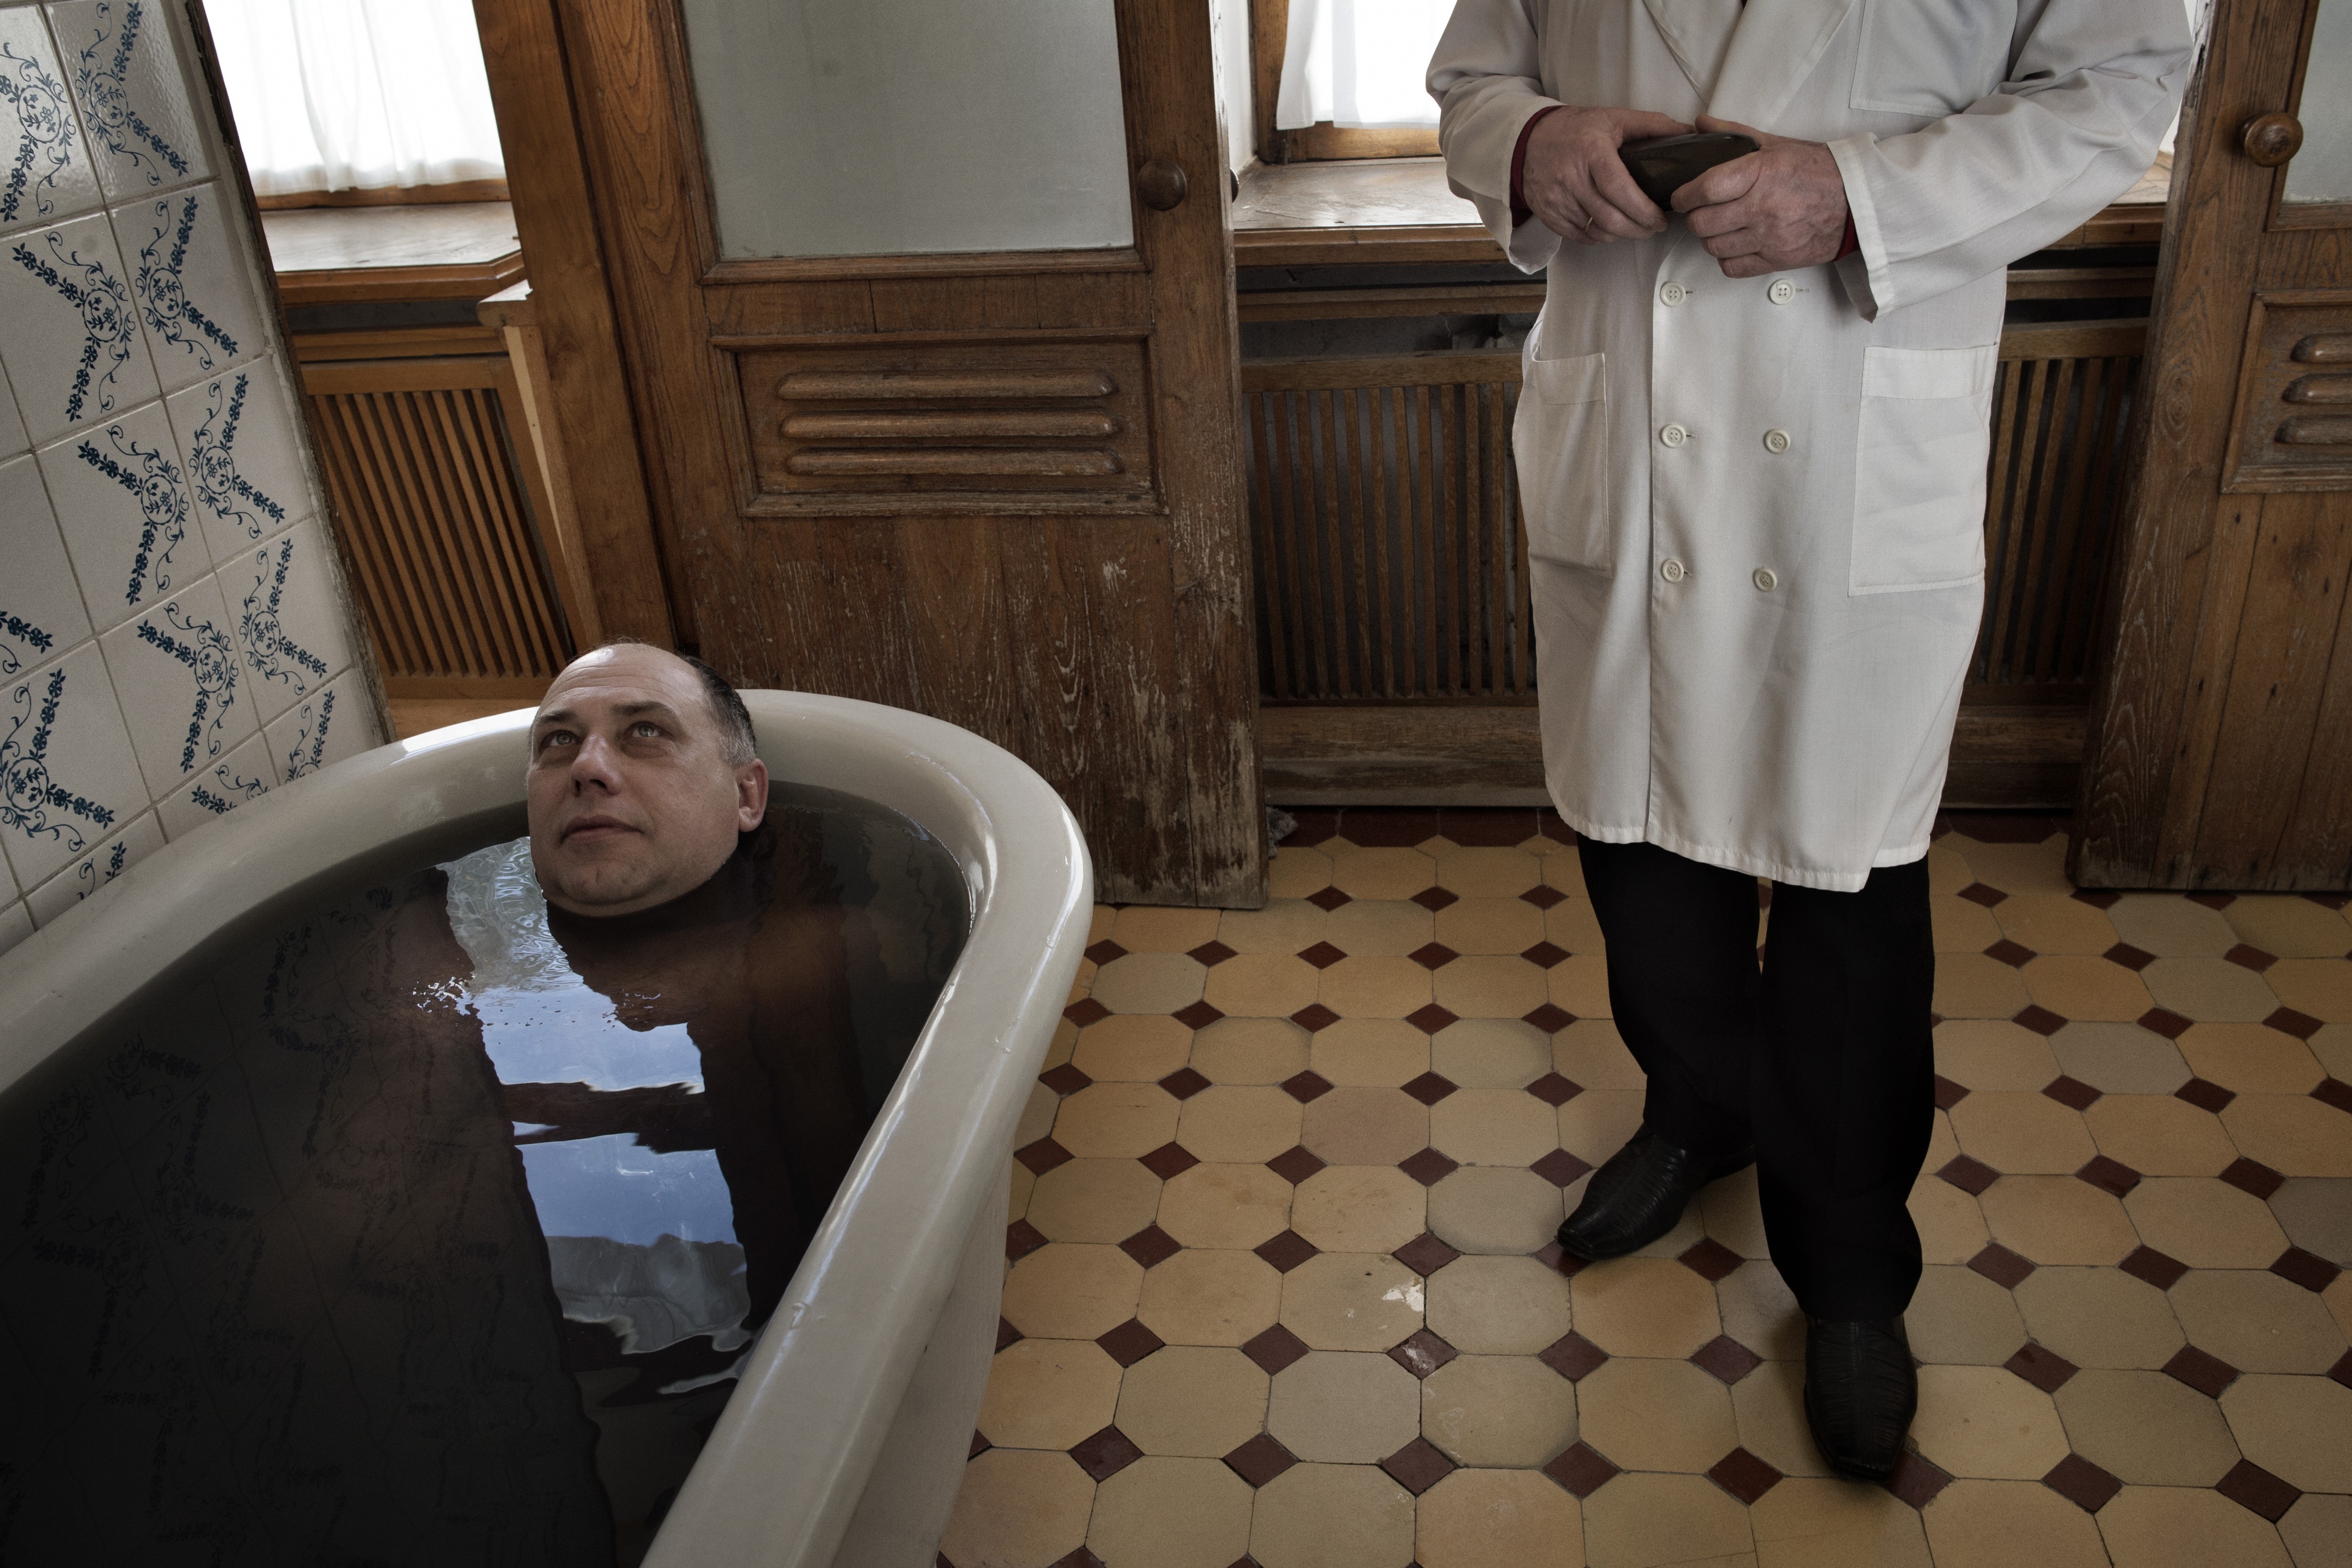 Sochi, Russia, Jan. 15,  2014: A patient takes a mineral bath at the Matsesta Sanatorium in Sochi. Starting in the late 1930s, Matsesta was at the center of Josef Stalin's drive to turn Sochi into the premier resort city of the Soviet Union.